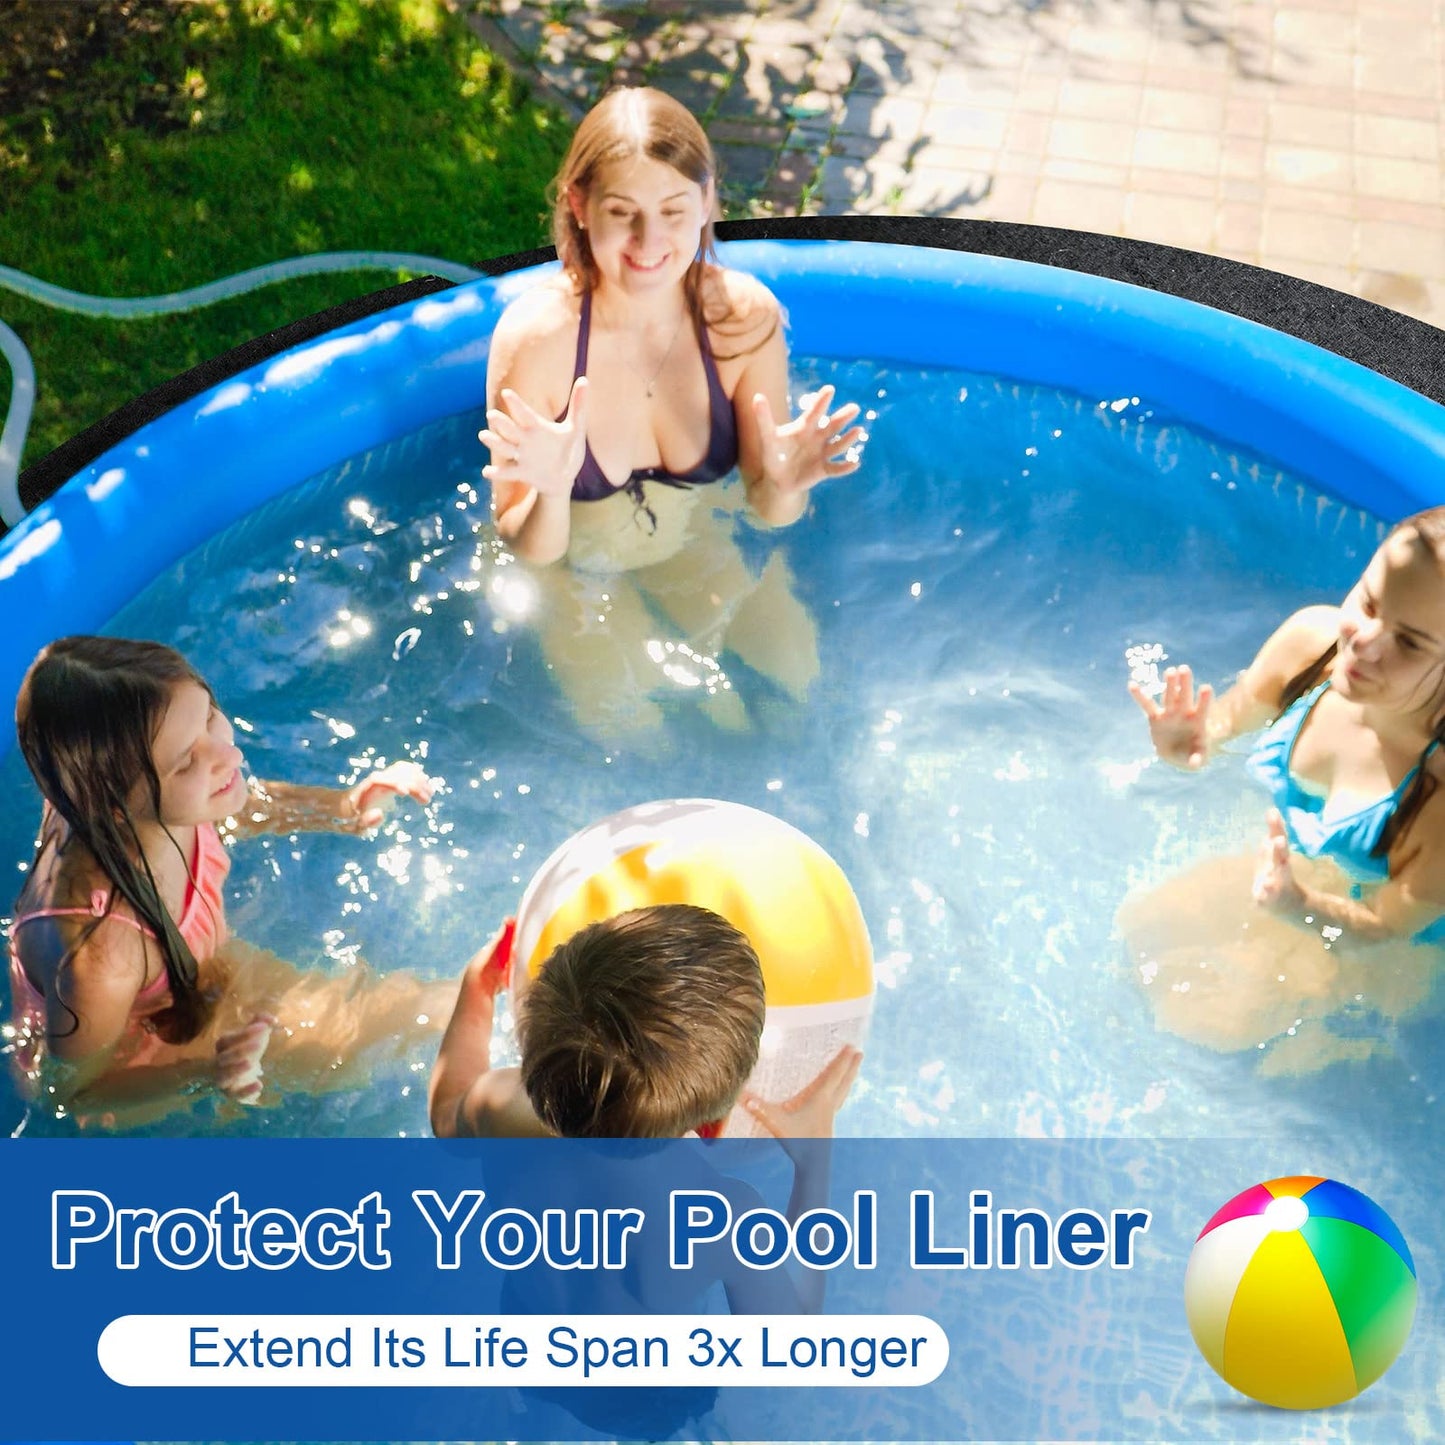 12 Foot 144 Inch Hot Tub Mat Round Pool Liner Pad for Above Ground Outdoor Indoor, Inflatable Swimming Pools Anti Slip Pad, Protect Hot Tub Pool from Wear, Absorbent Spa Pool Flooring Protector Mat